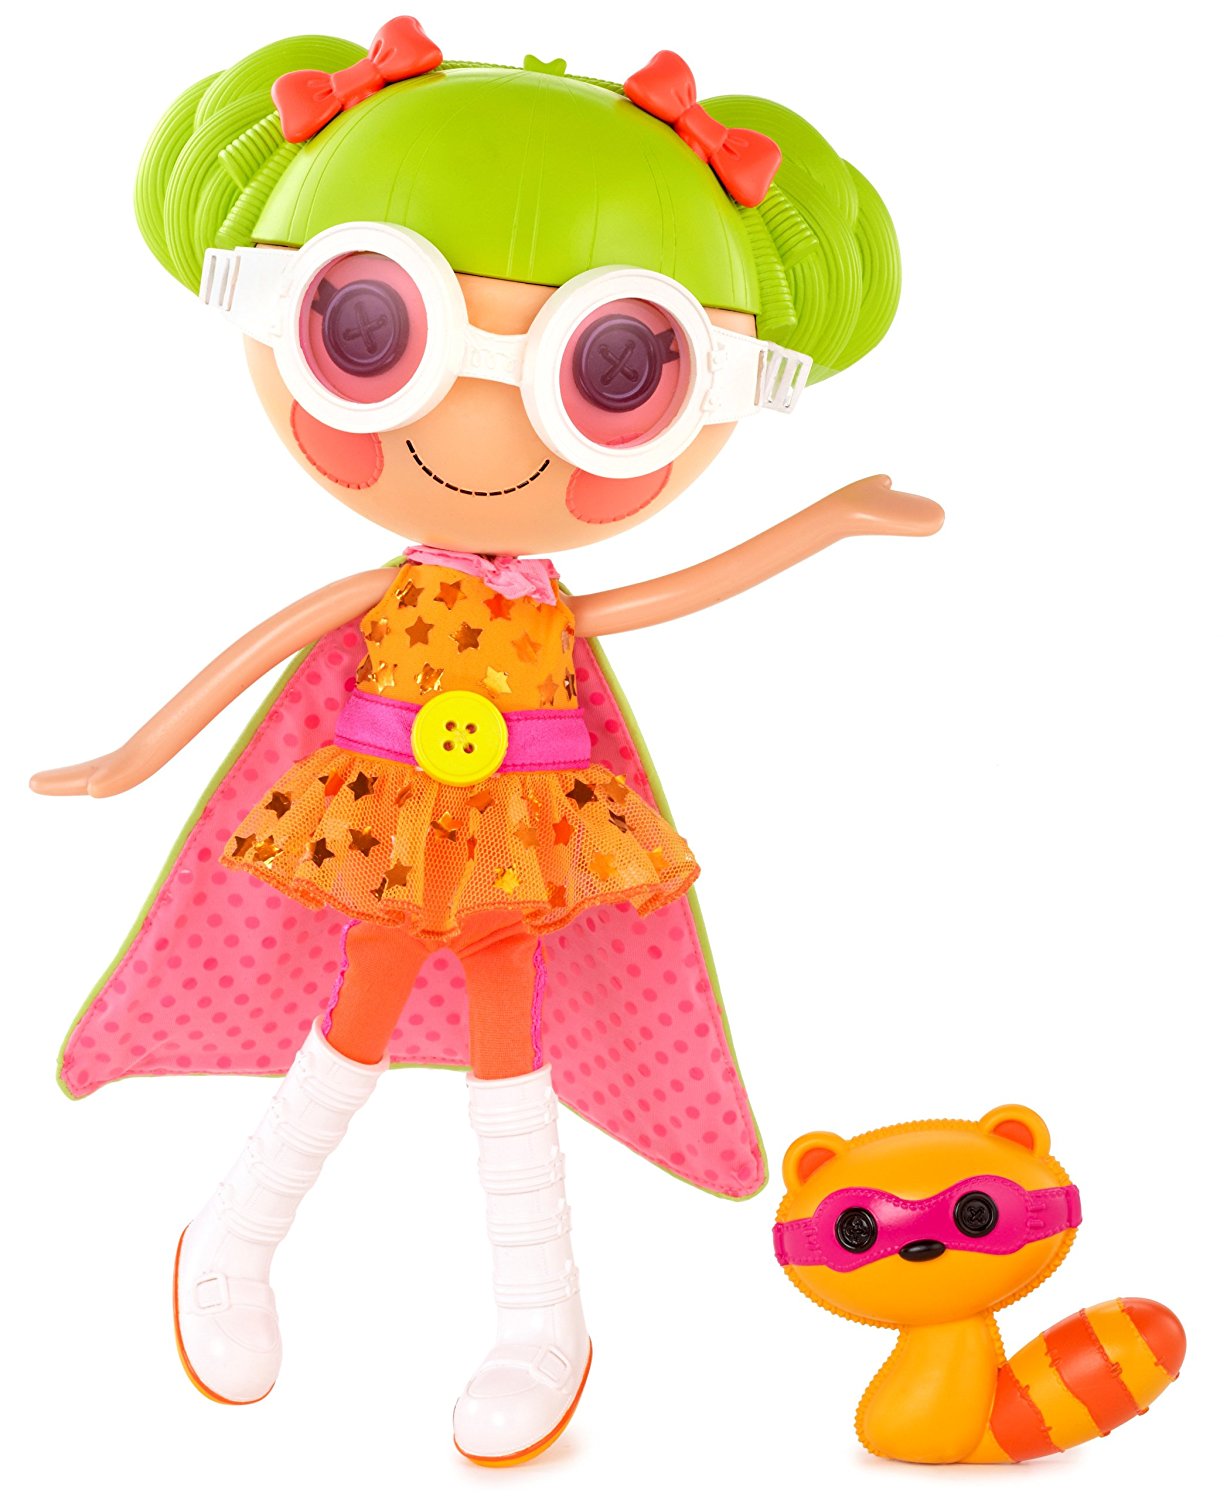 HOT* Amazon: 3 Different Lalaloopsy Dolls Only $16.99 Each Shipped (Reg. $24.99!)